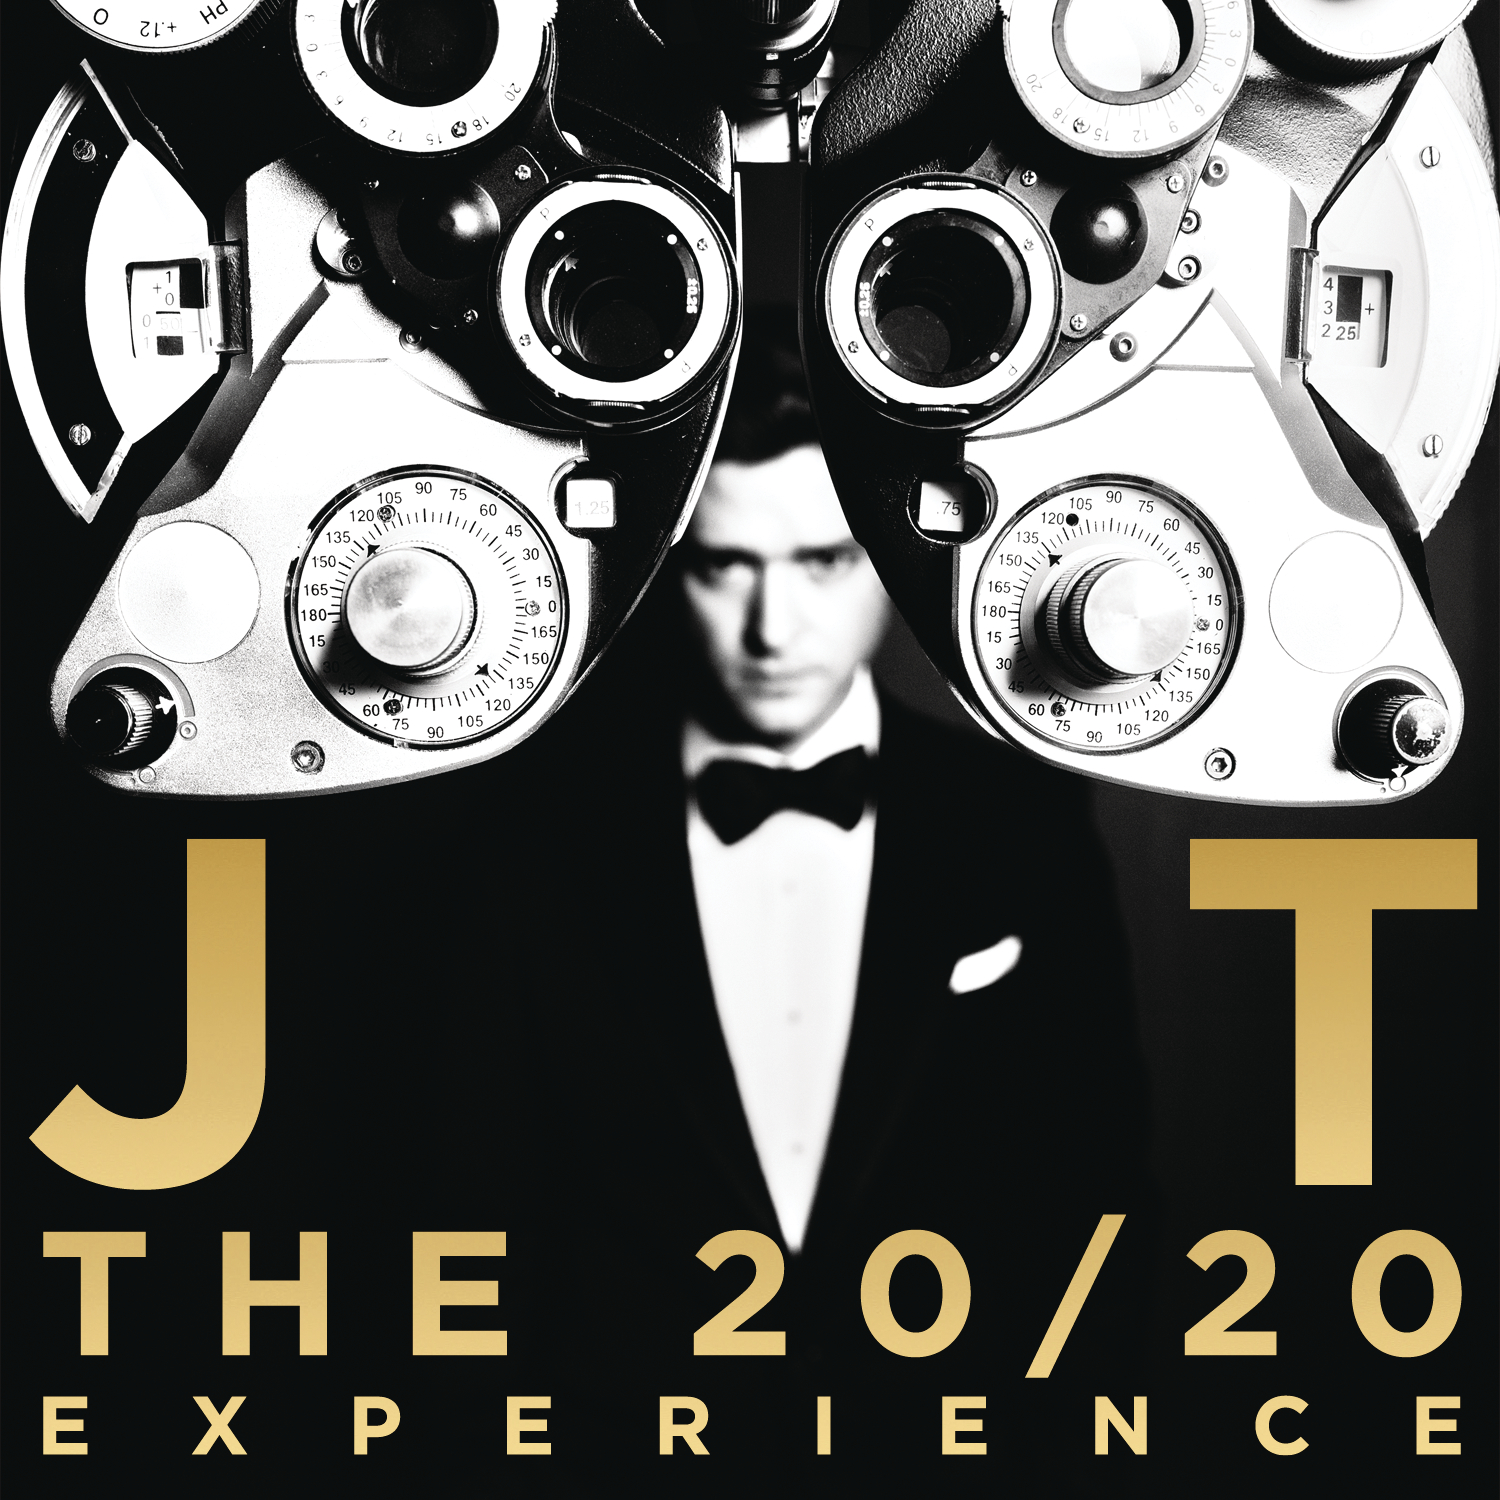 Justin Timberlake – The 20/20 Experience (Deluxe)
Released: March 15, 2013 
Label: RCA Records
